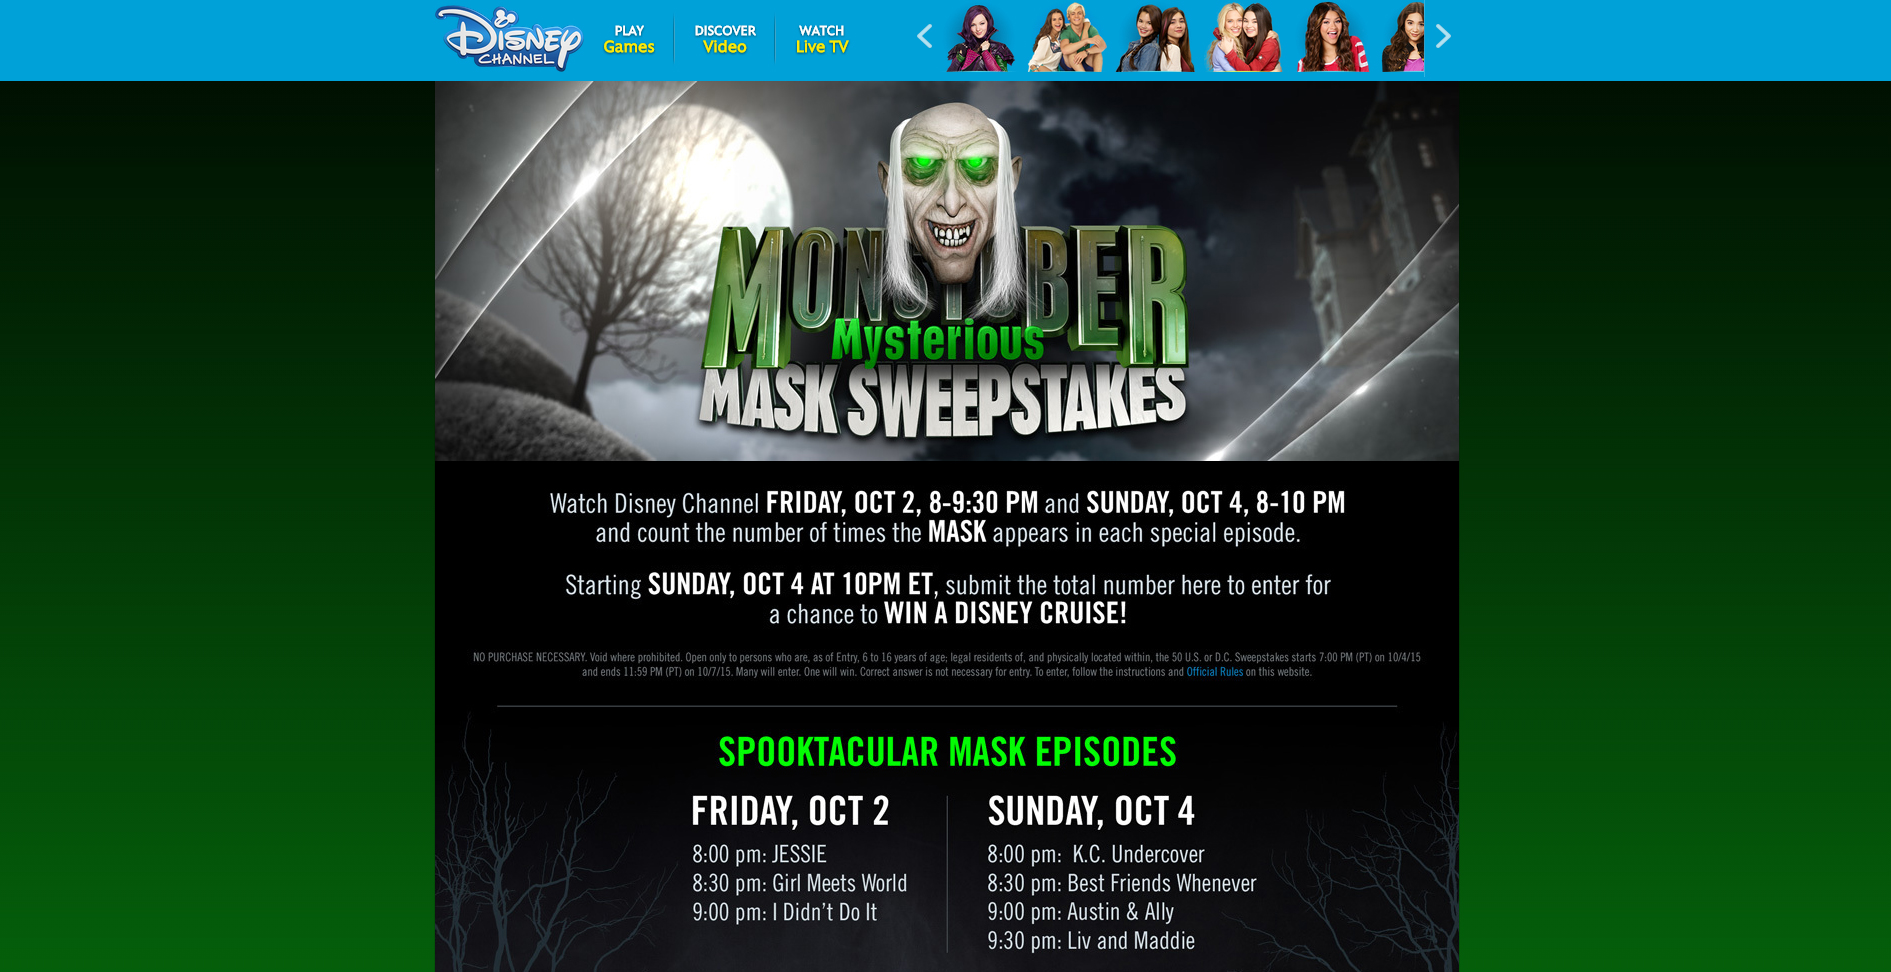 DisneyChannel.com/Mask - Disney Channel Monstober Mysterious Mask Sweepstakes